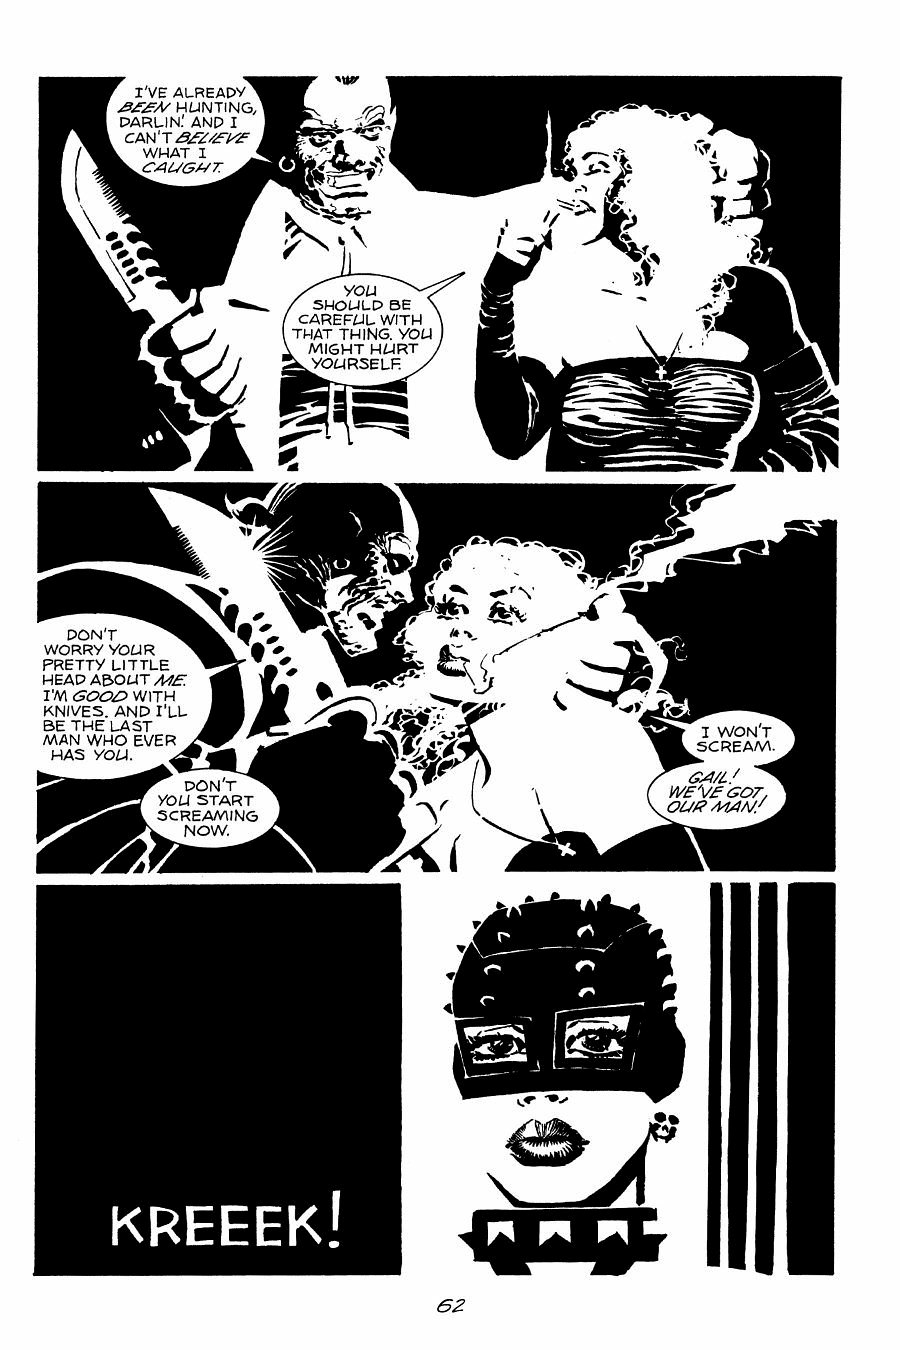 page 62 of sin city 6 booze broads and bullets